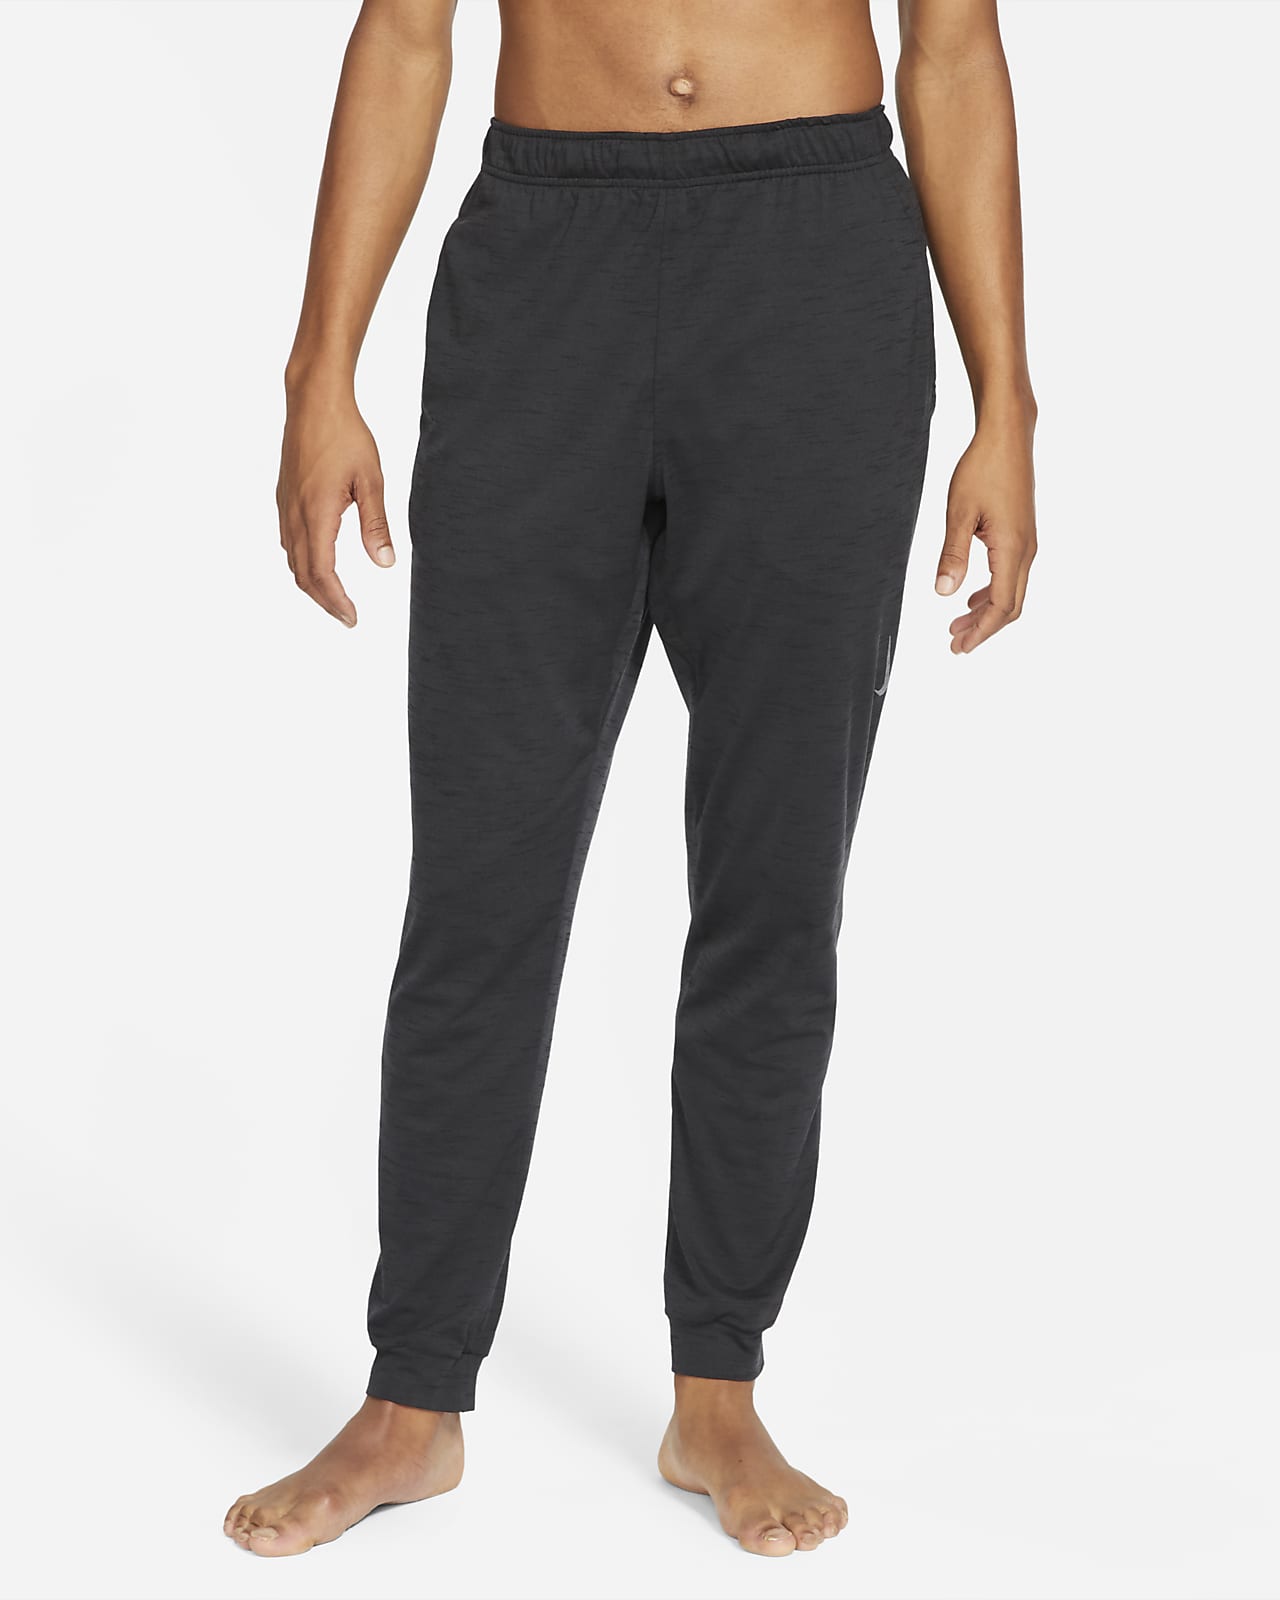 Nike Dri-fit tapered fleece track pants - Nike | Mens fleece pants, Mens  outfits, Athletic workout clothes